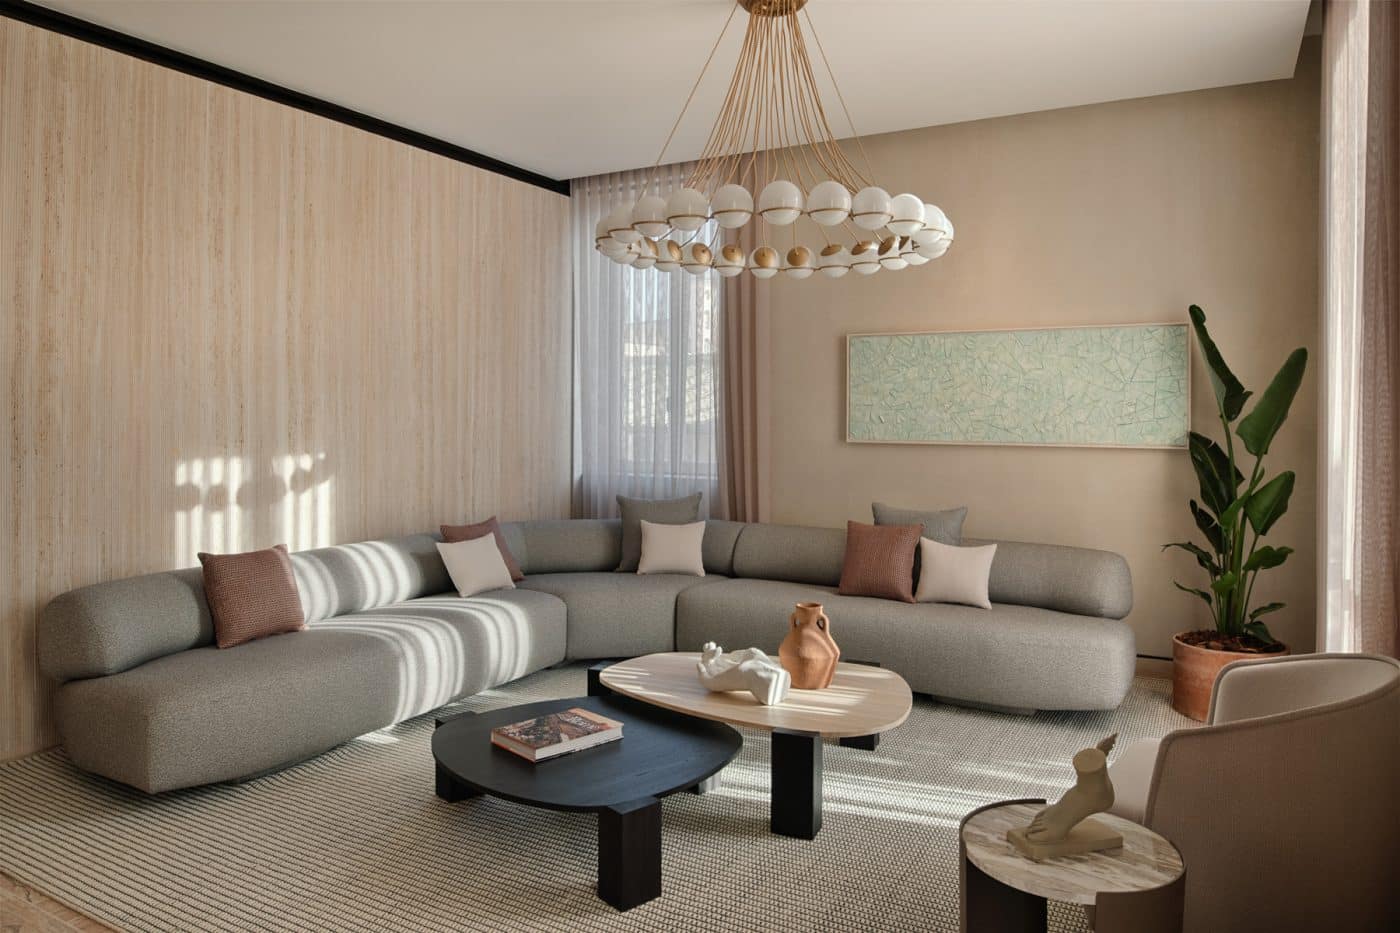 At the Six Senses Rome, Patricia Urquiola outfitted the living room of the Lata Suite in a sectional sofa and coffee table from her Gogan collection for Moroso, 2019; a Le Sfere chandelier by Gino Sarfatti for Astep; Metamosaic, a 2023 painting by Paolo Polloniato; and a bespoke rug Urquiola designed for the hotel. 